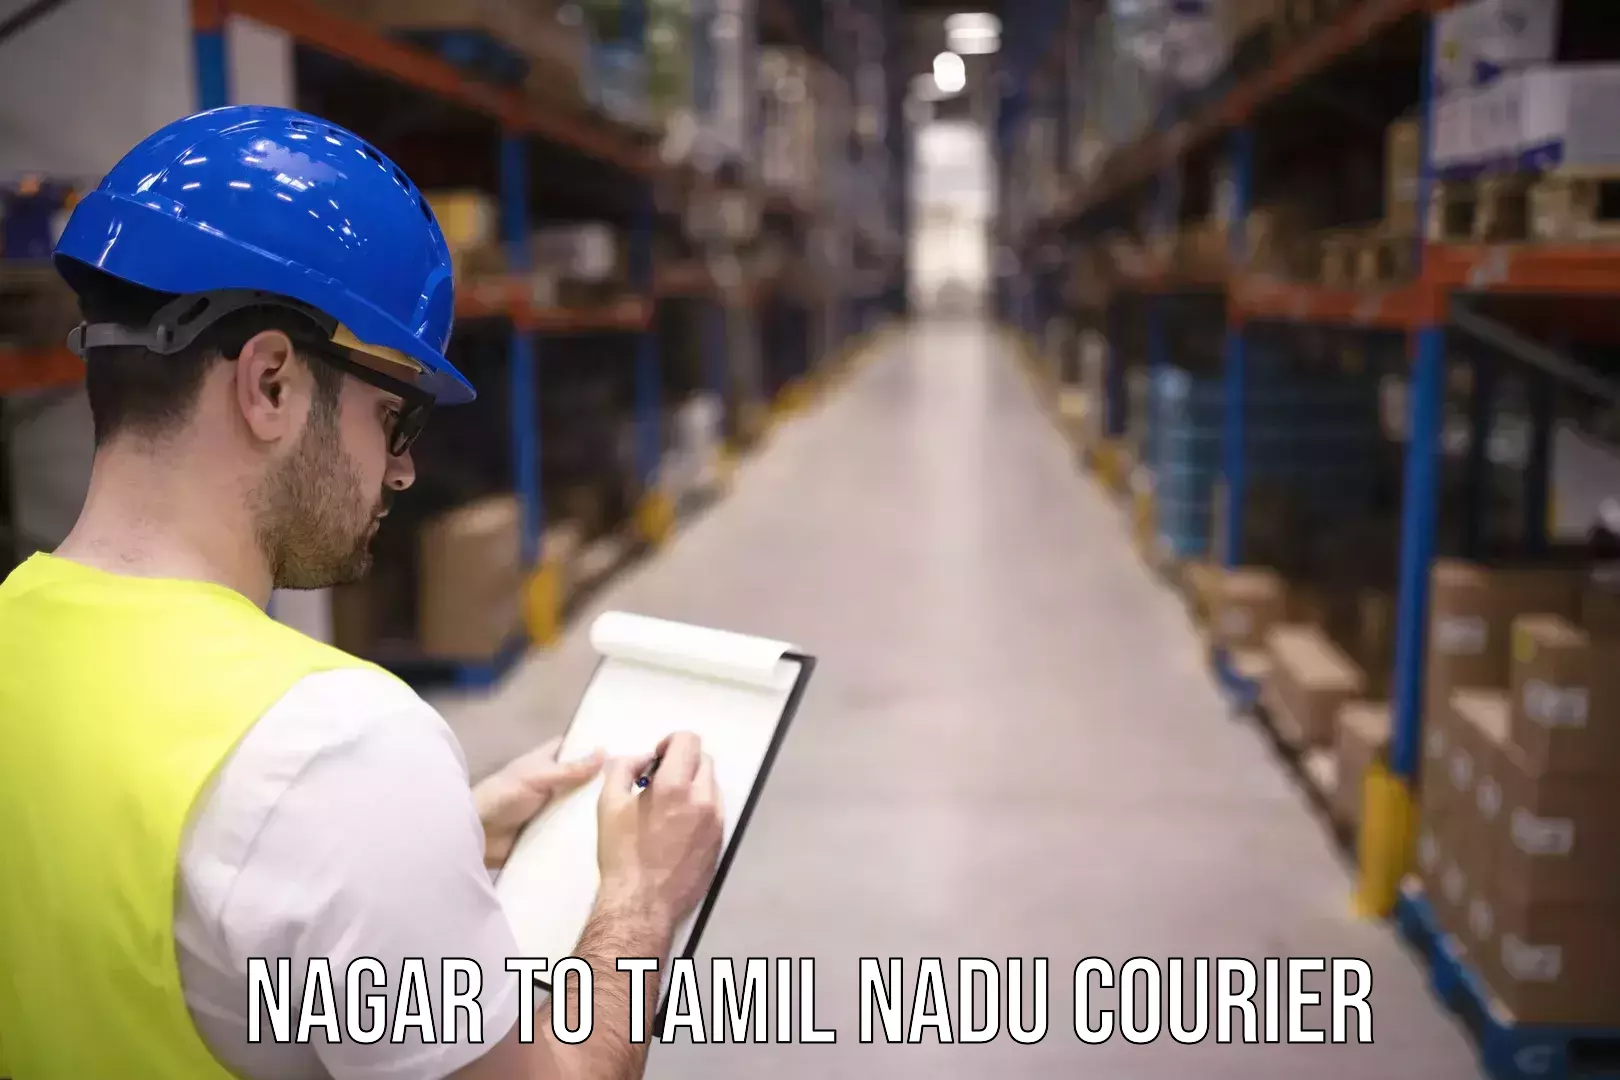 On-call courier service Nagar to Tamil Nadu Agricultural University Coimbatore